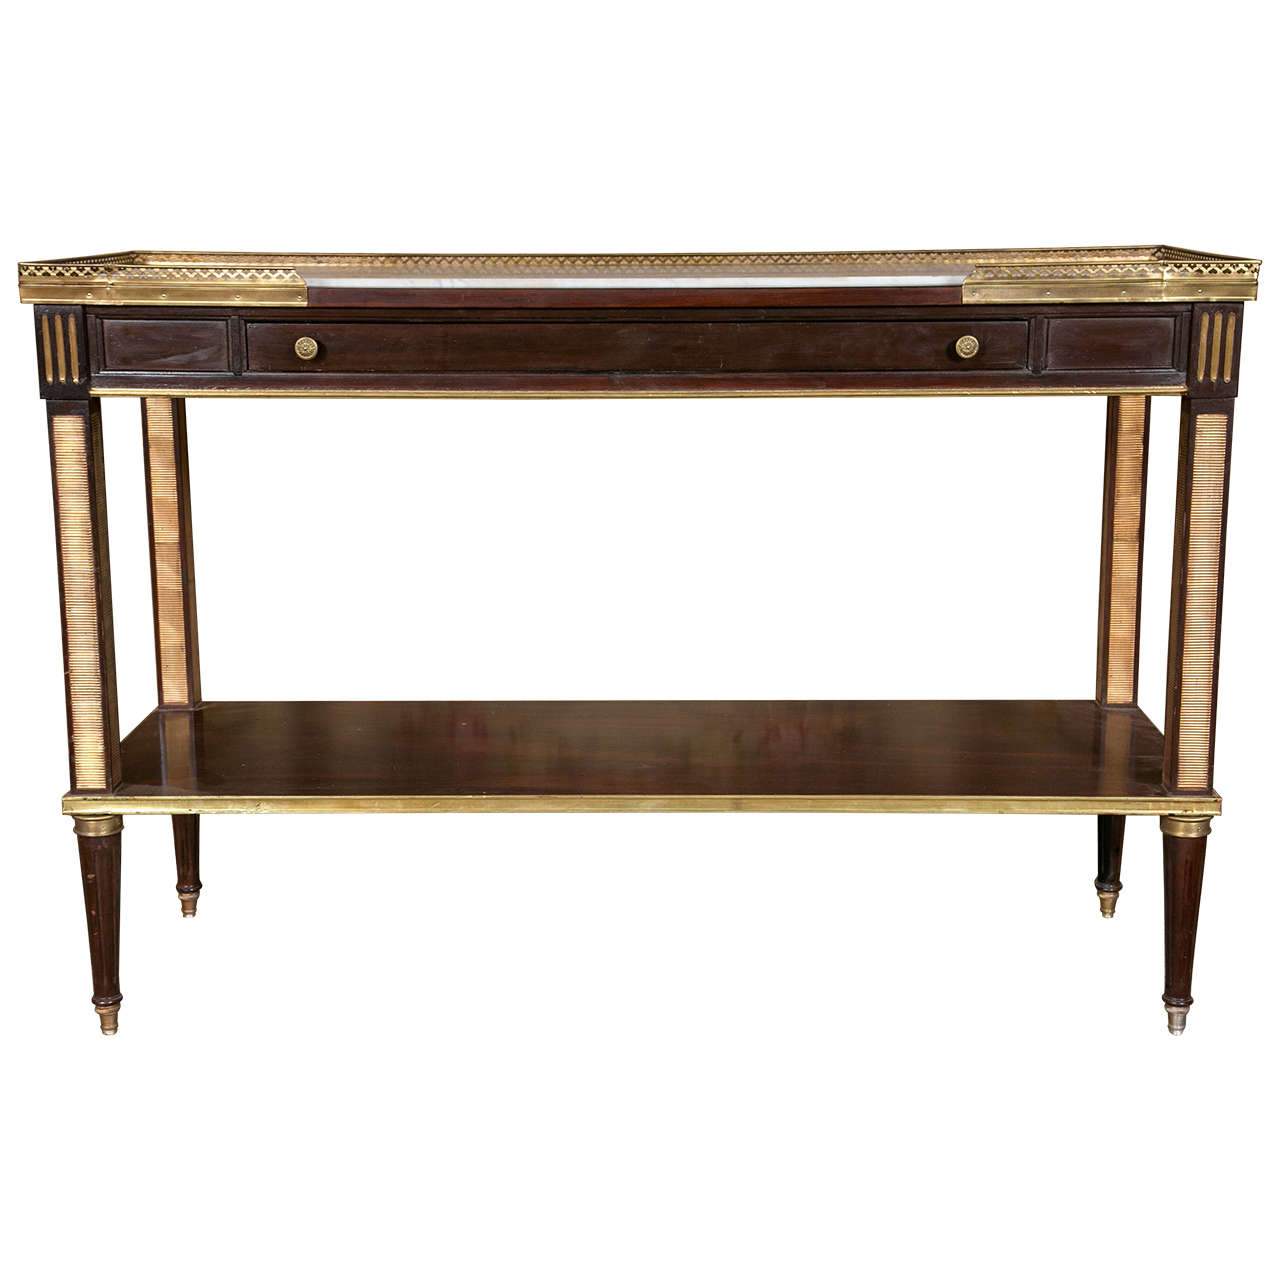 Russian Neoclassical Style Marble-Top Console Table